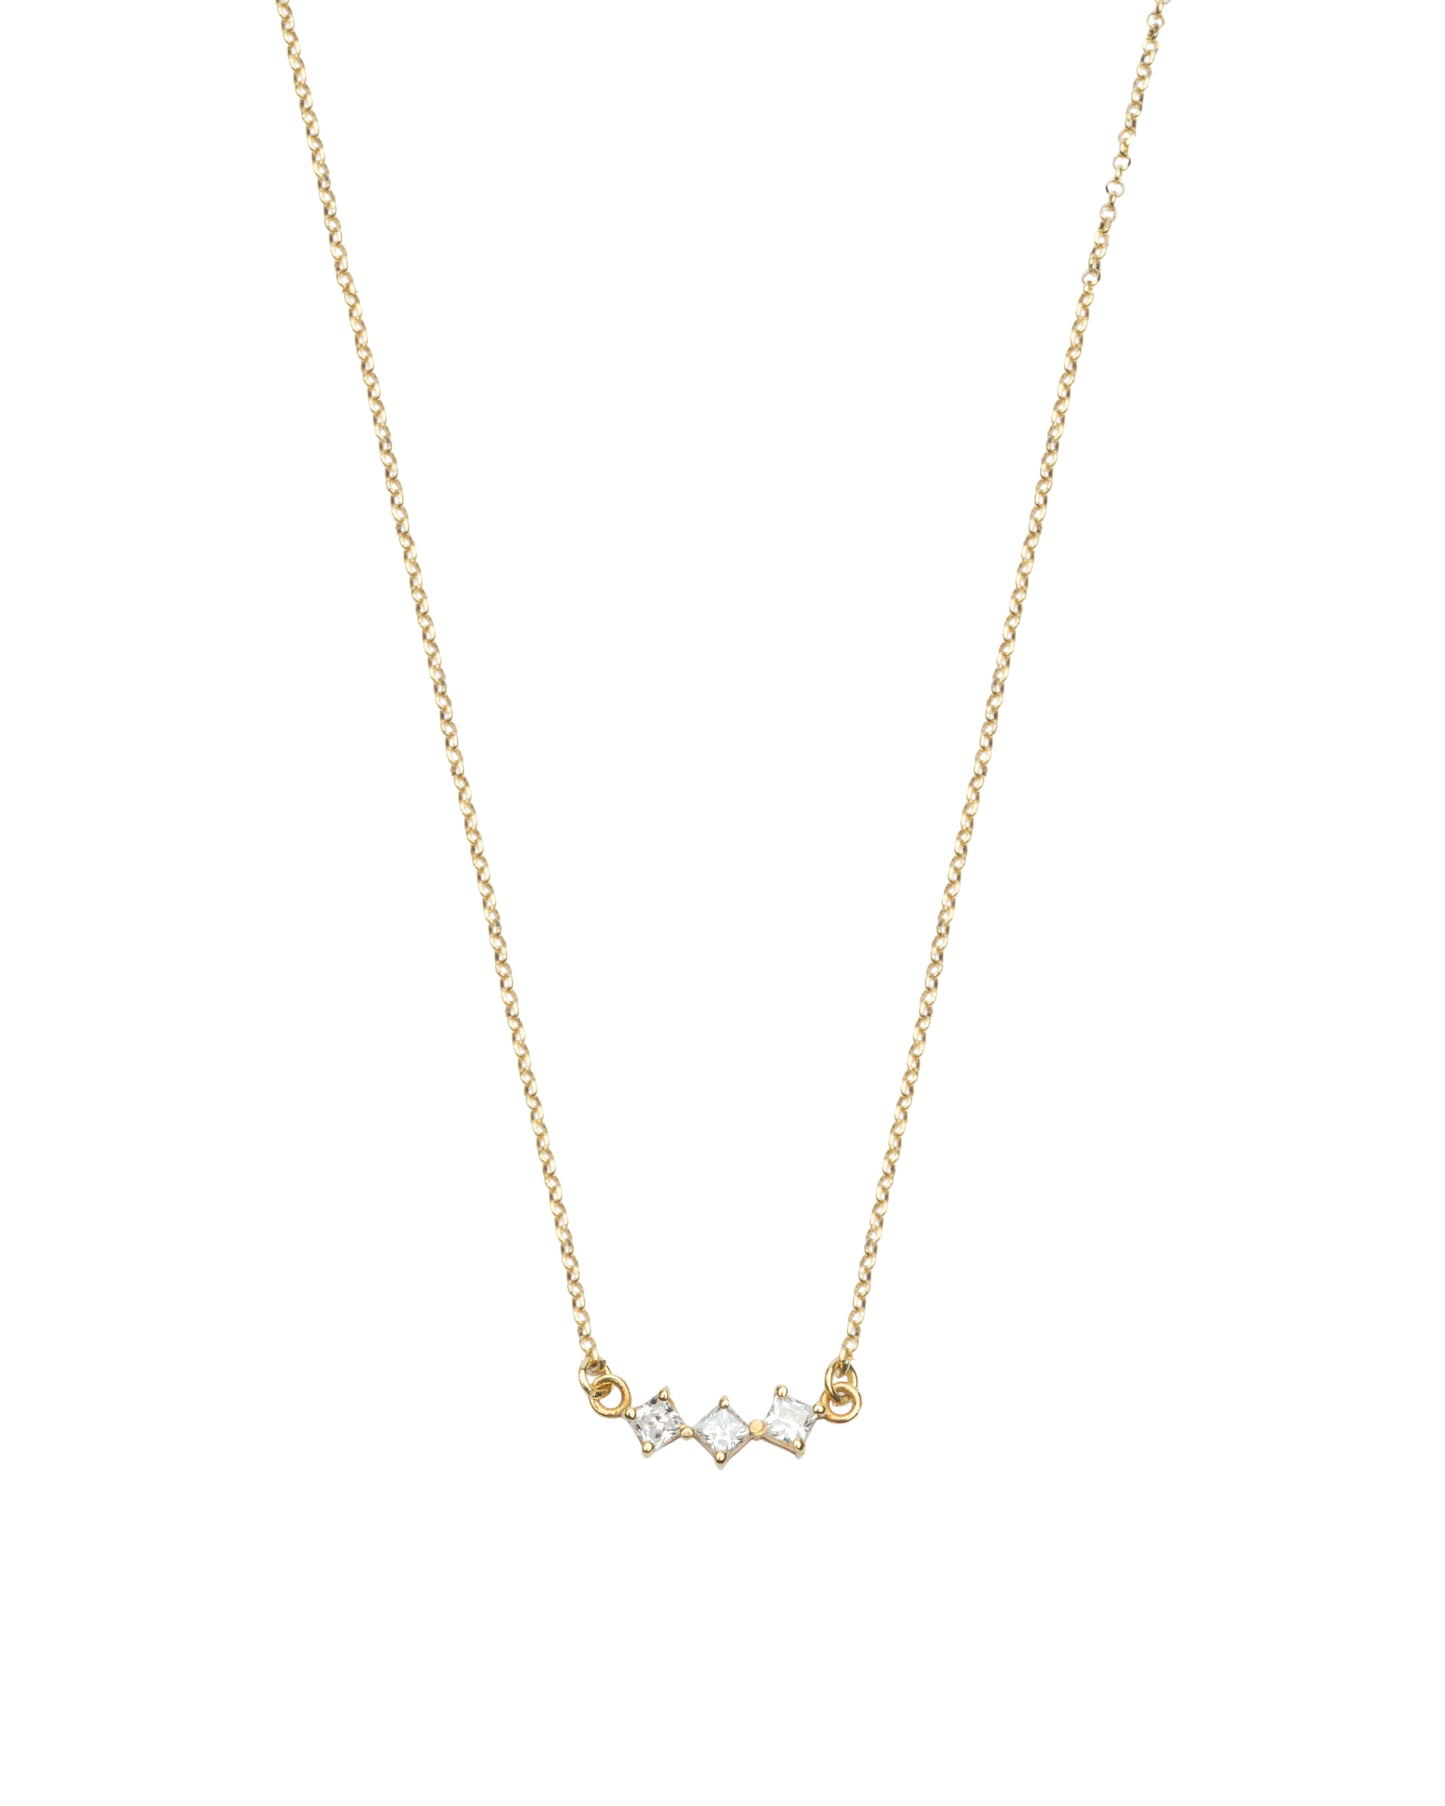 White Little Rhombus Necklace - Gold Plated